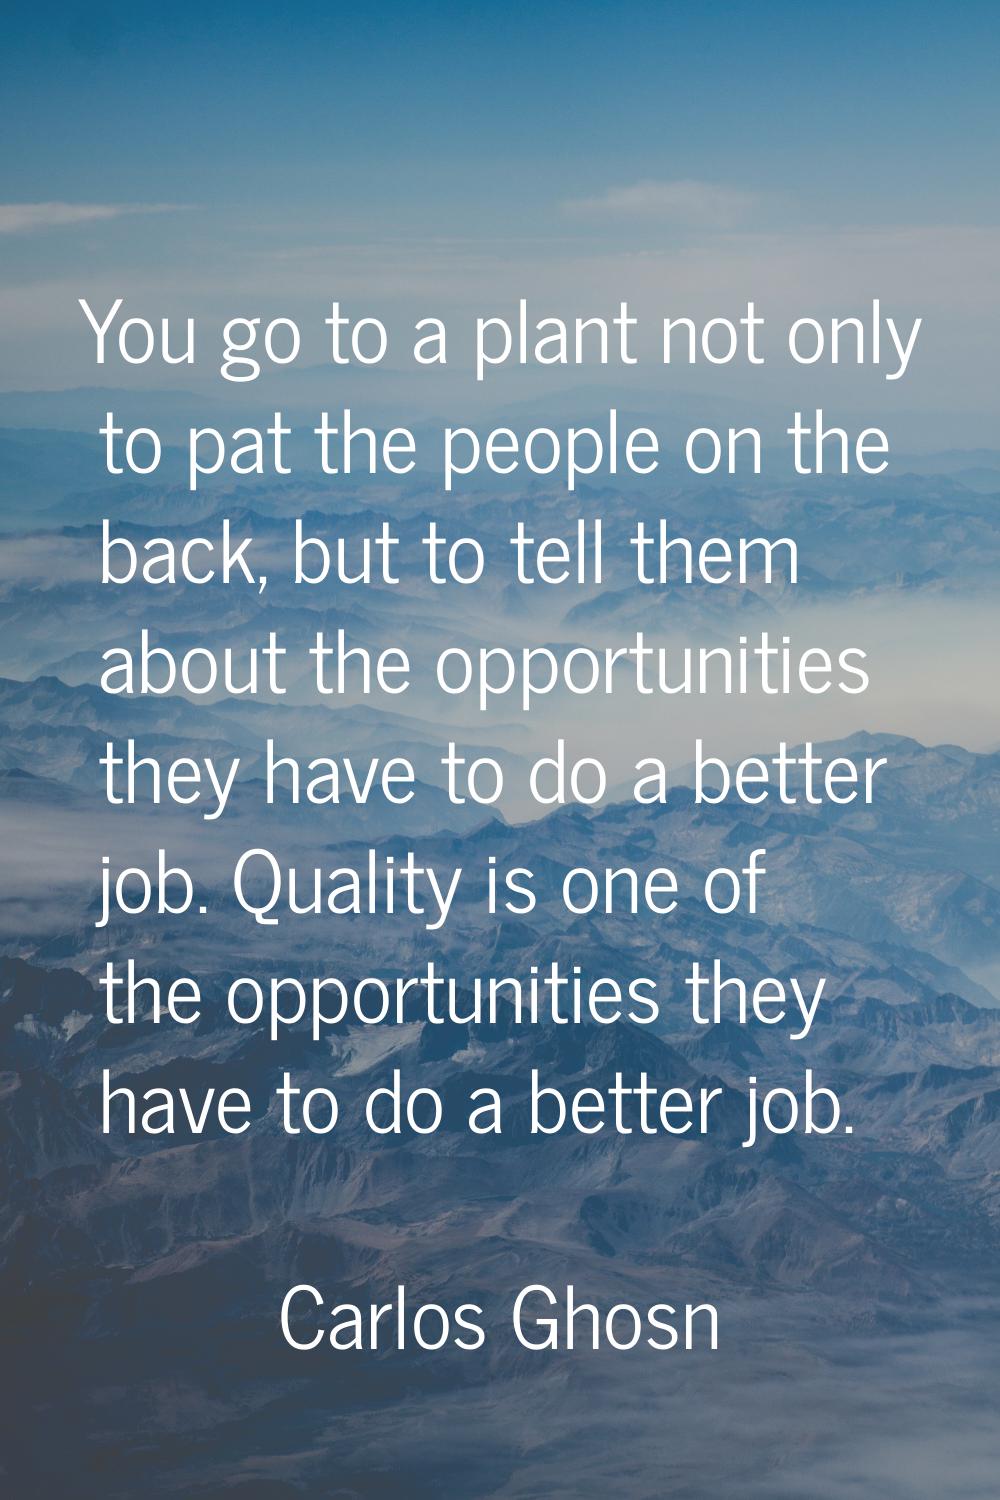 You go to a plant not only to pat the people on the back, but to tell them about the opportunities 